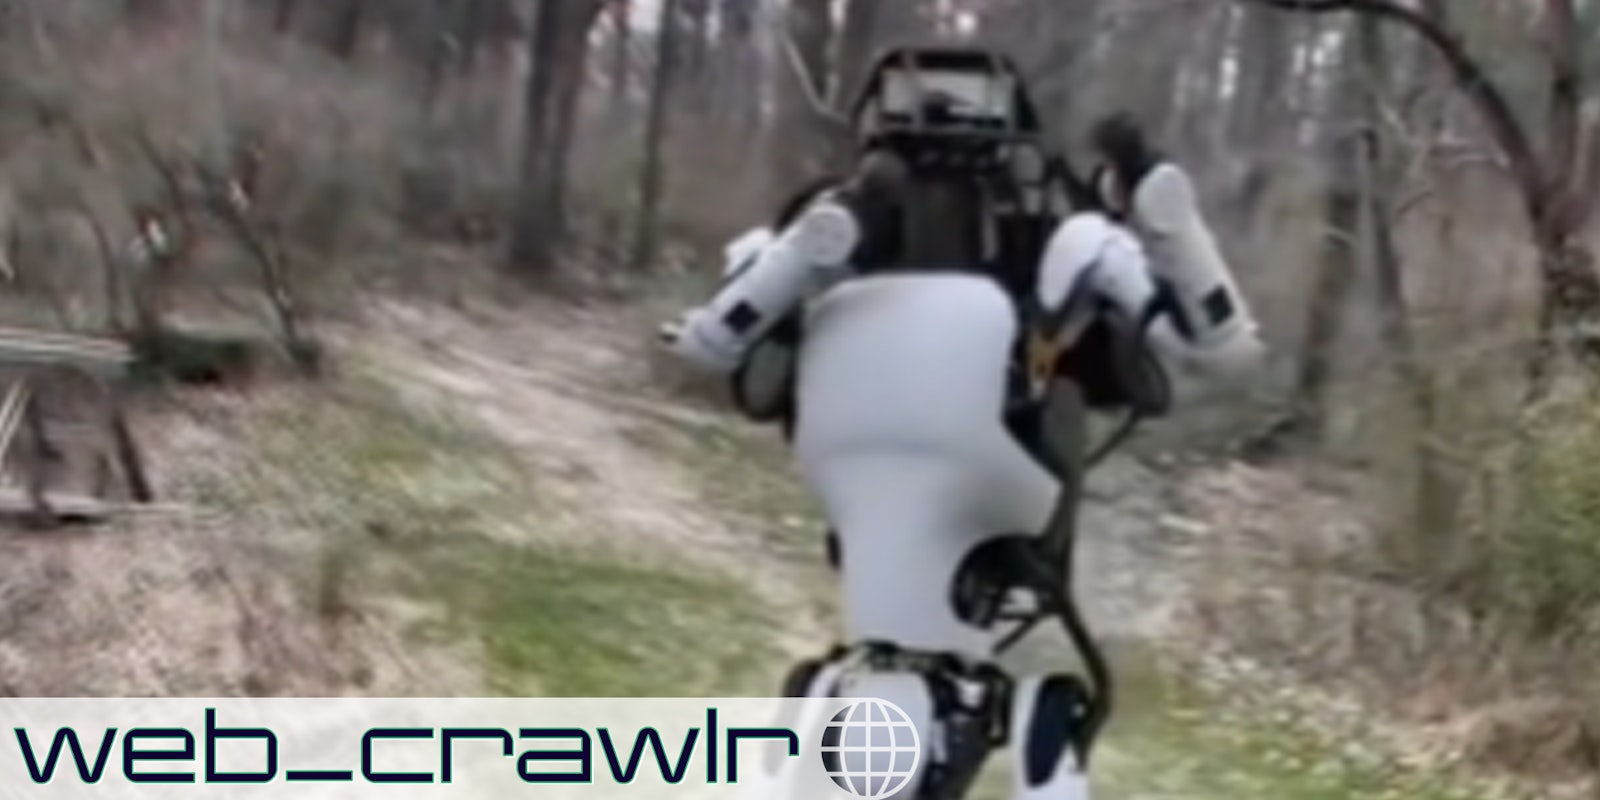 A fake video of a Boston Dynamics robot. The Daily Dot newsletter web_crawlr logo is in the bottom left corner.